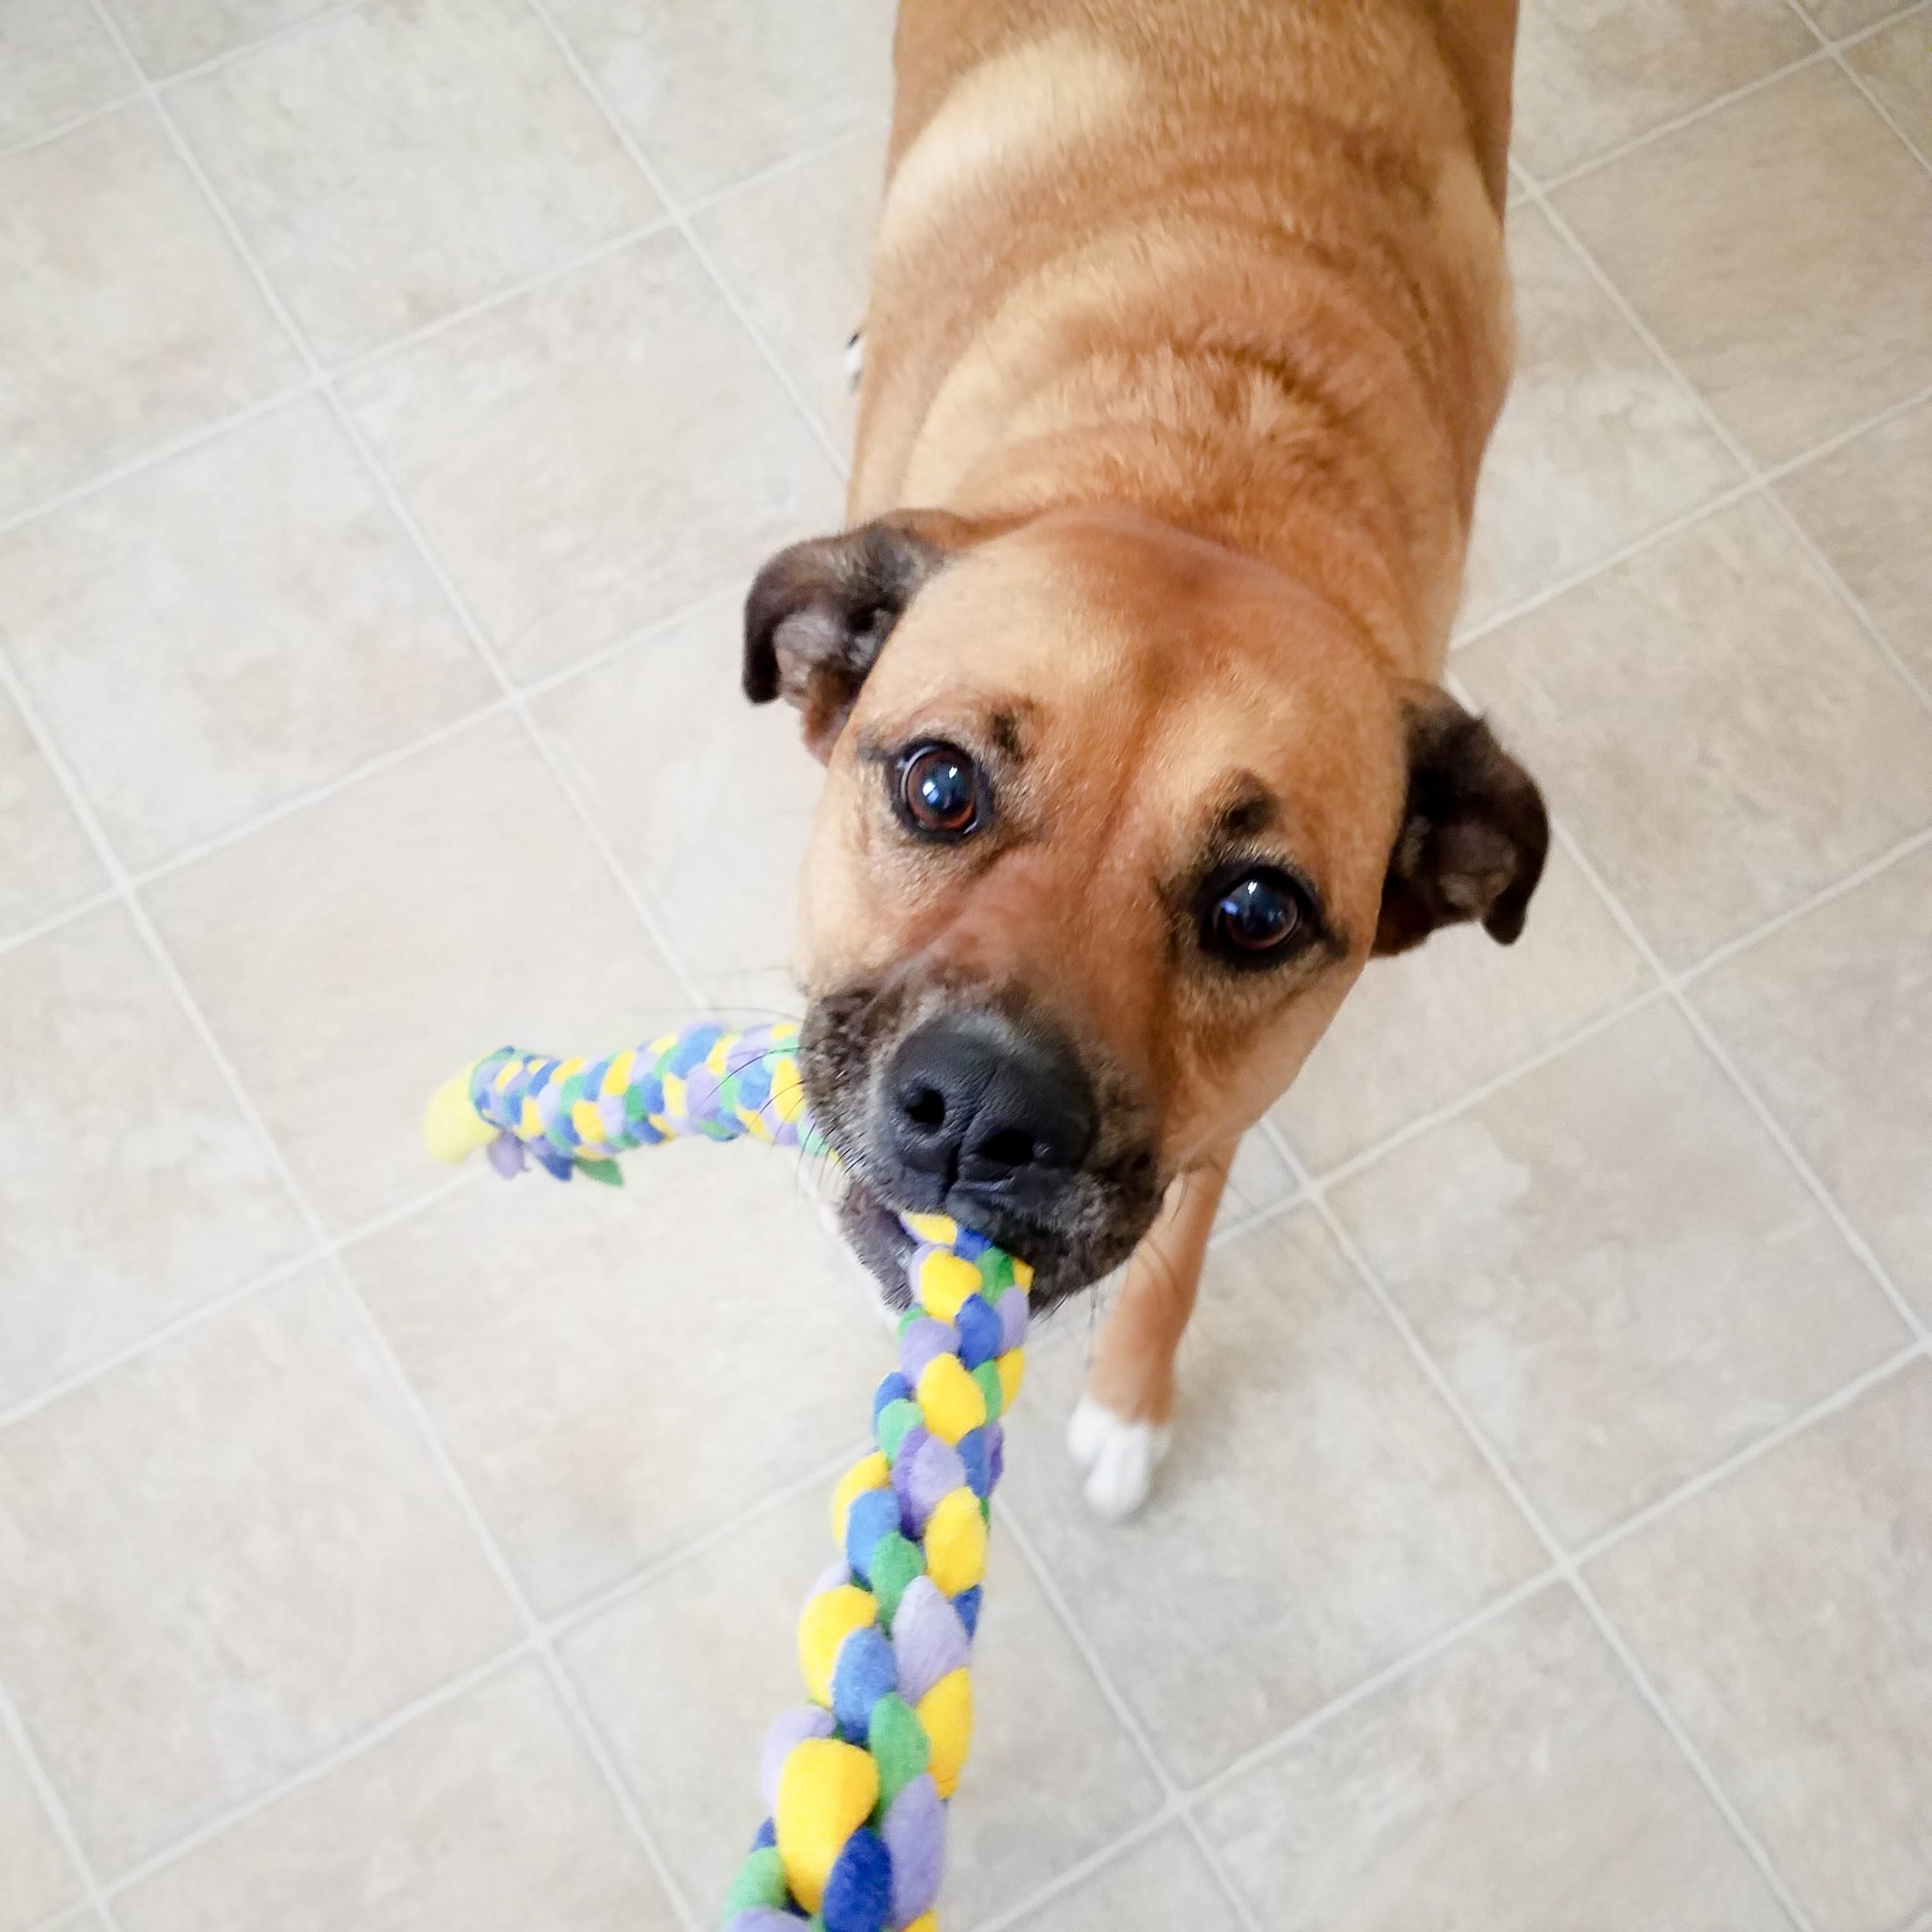 How To Make A Square Knot Dog Tug Toy